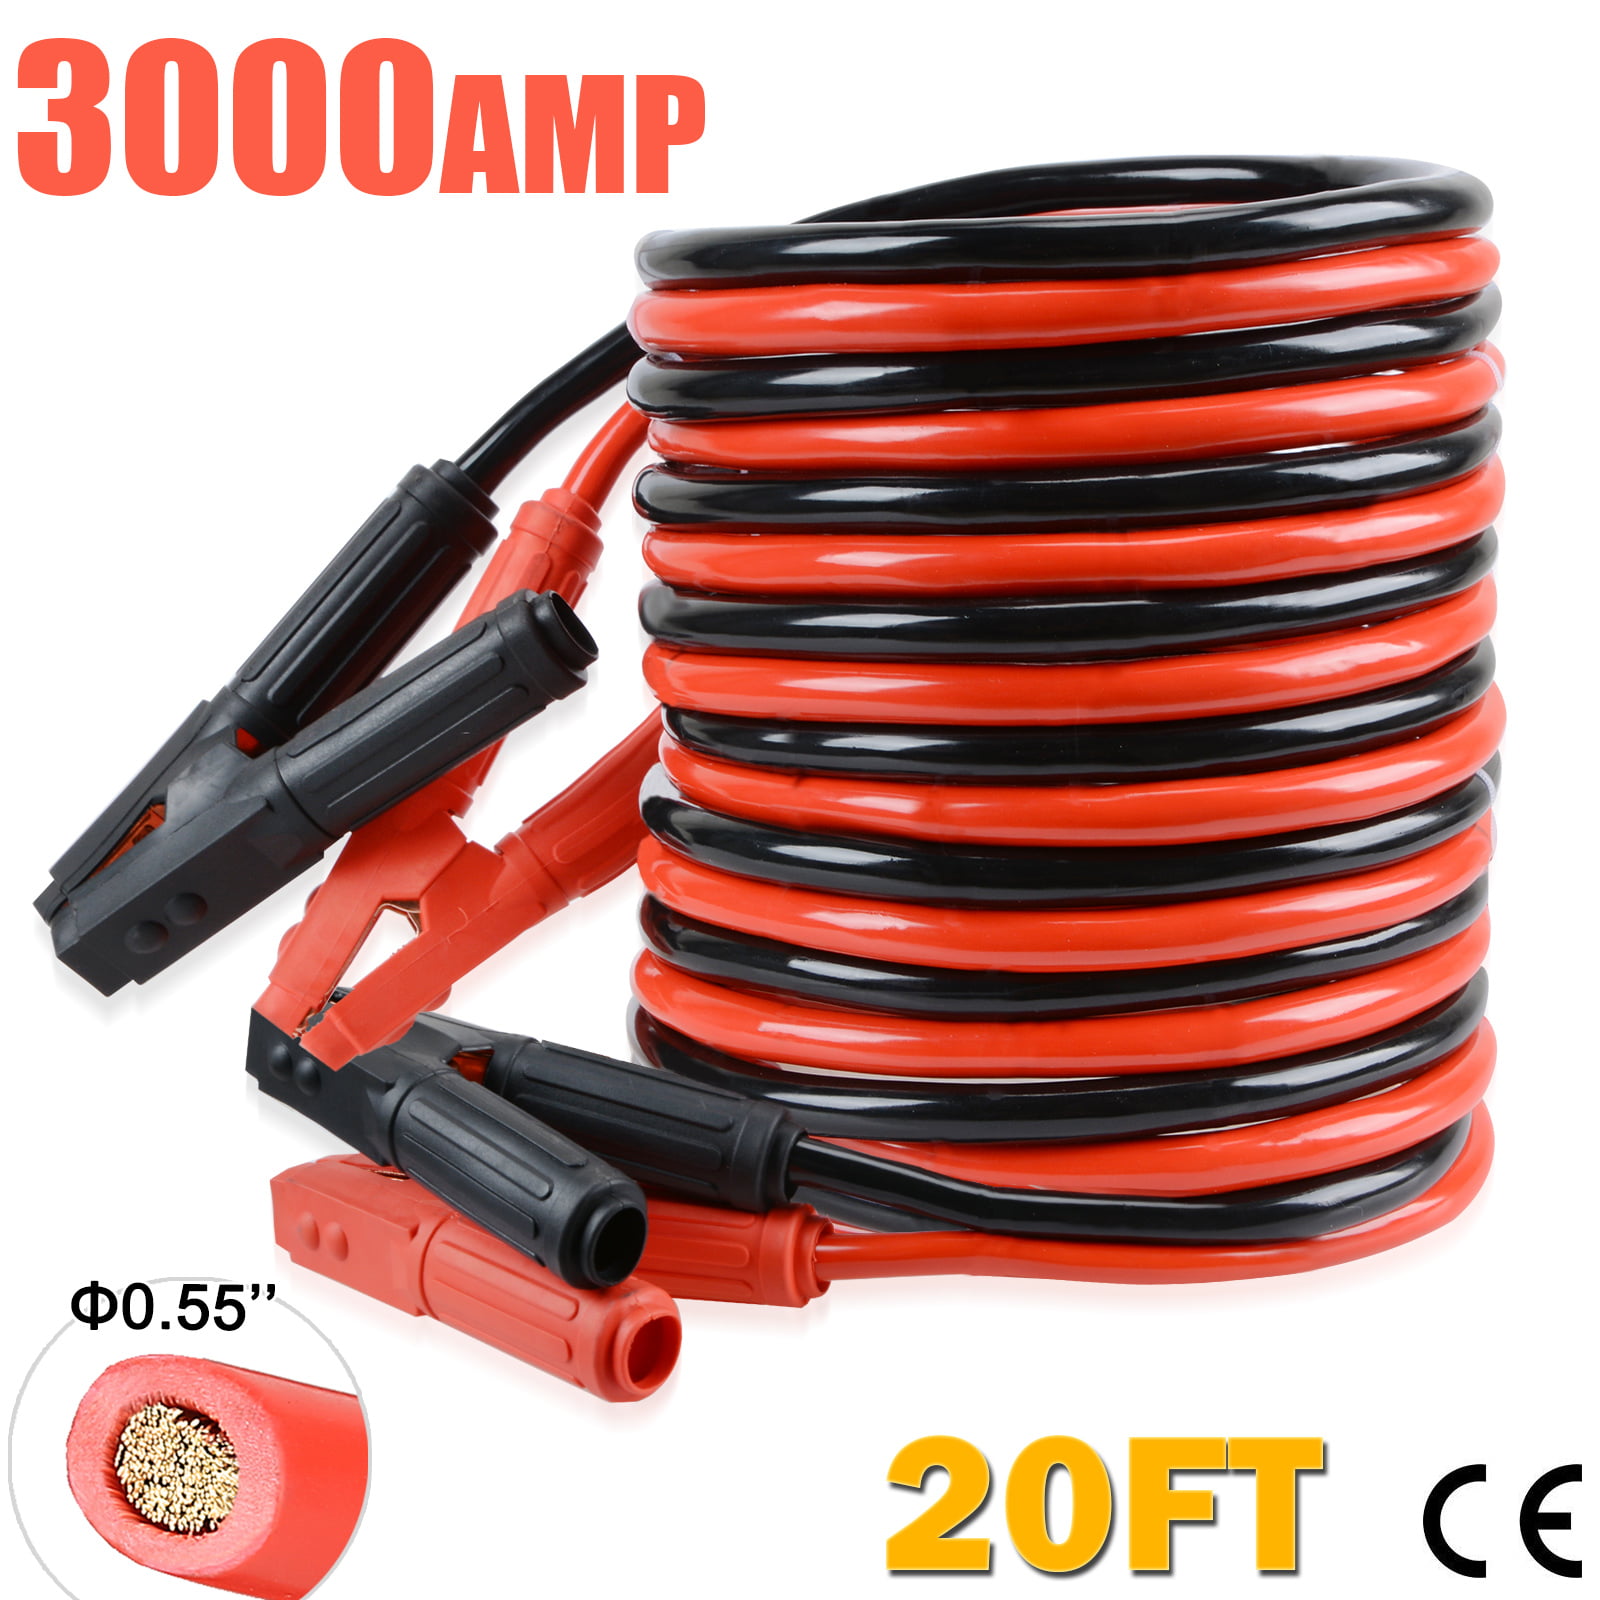 800A 20FT Car Battery Jumper Jump Start Booster Cables Emergency INSULATED CLIPS 